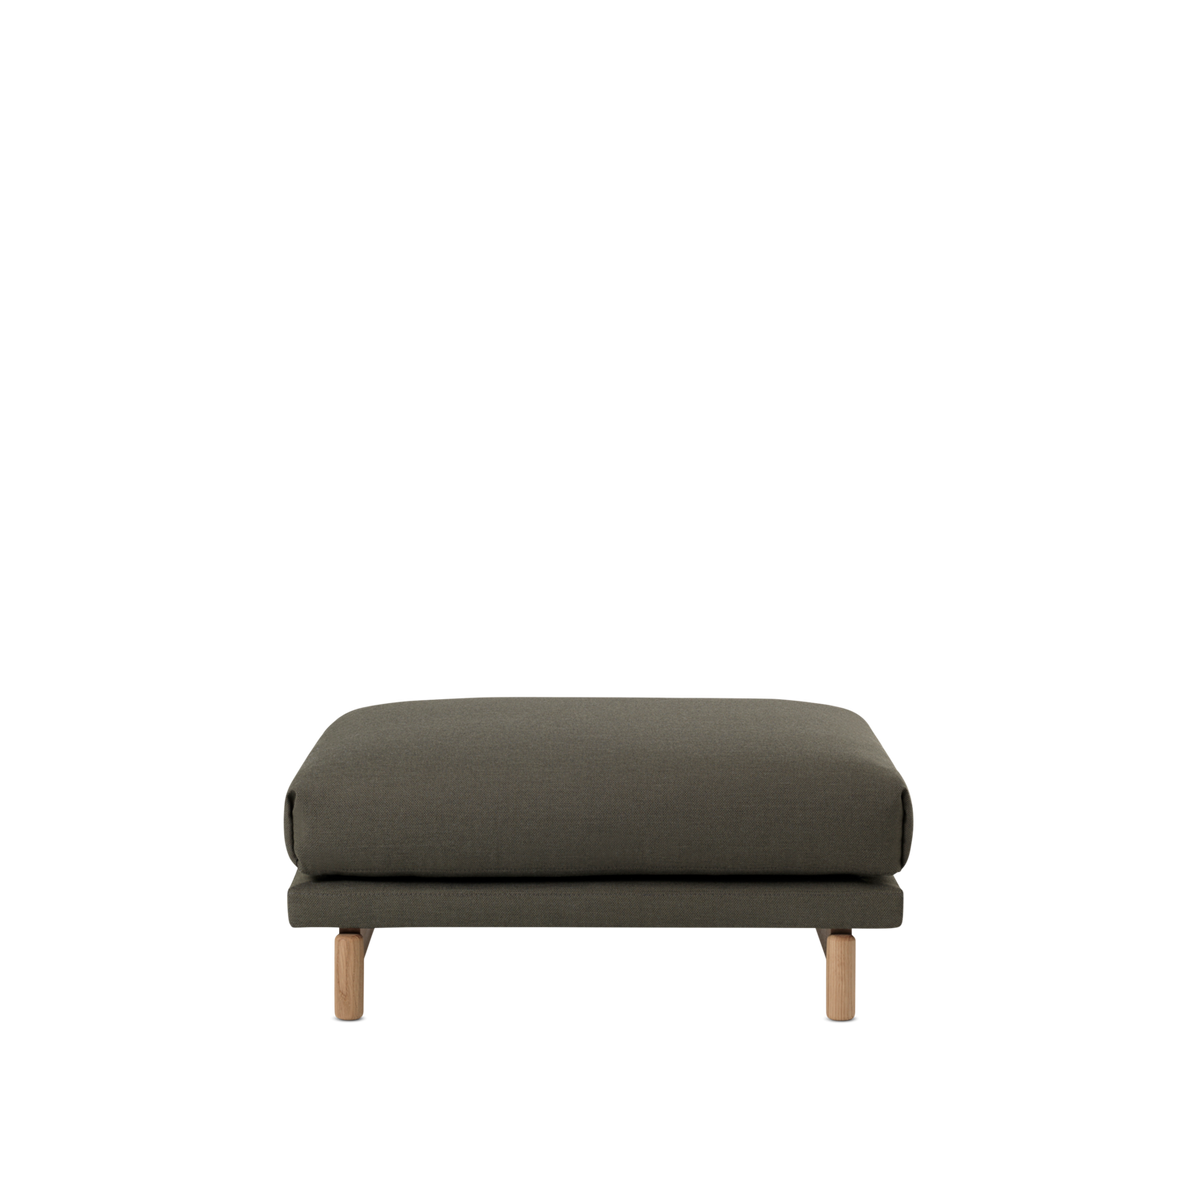 Rest Pouf by Muuto